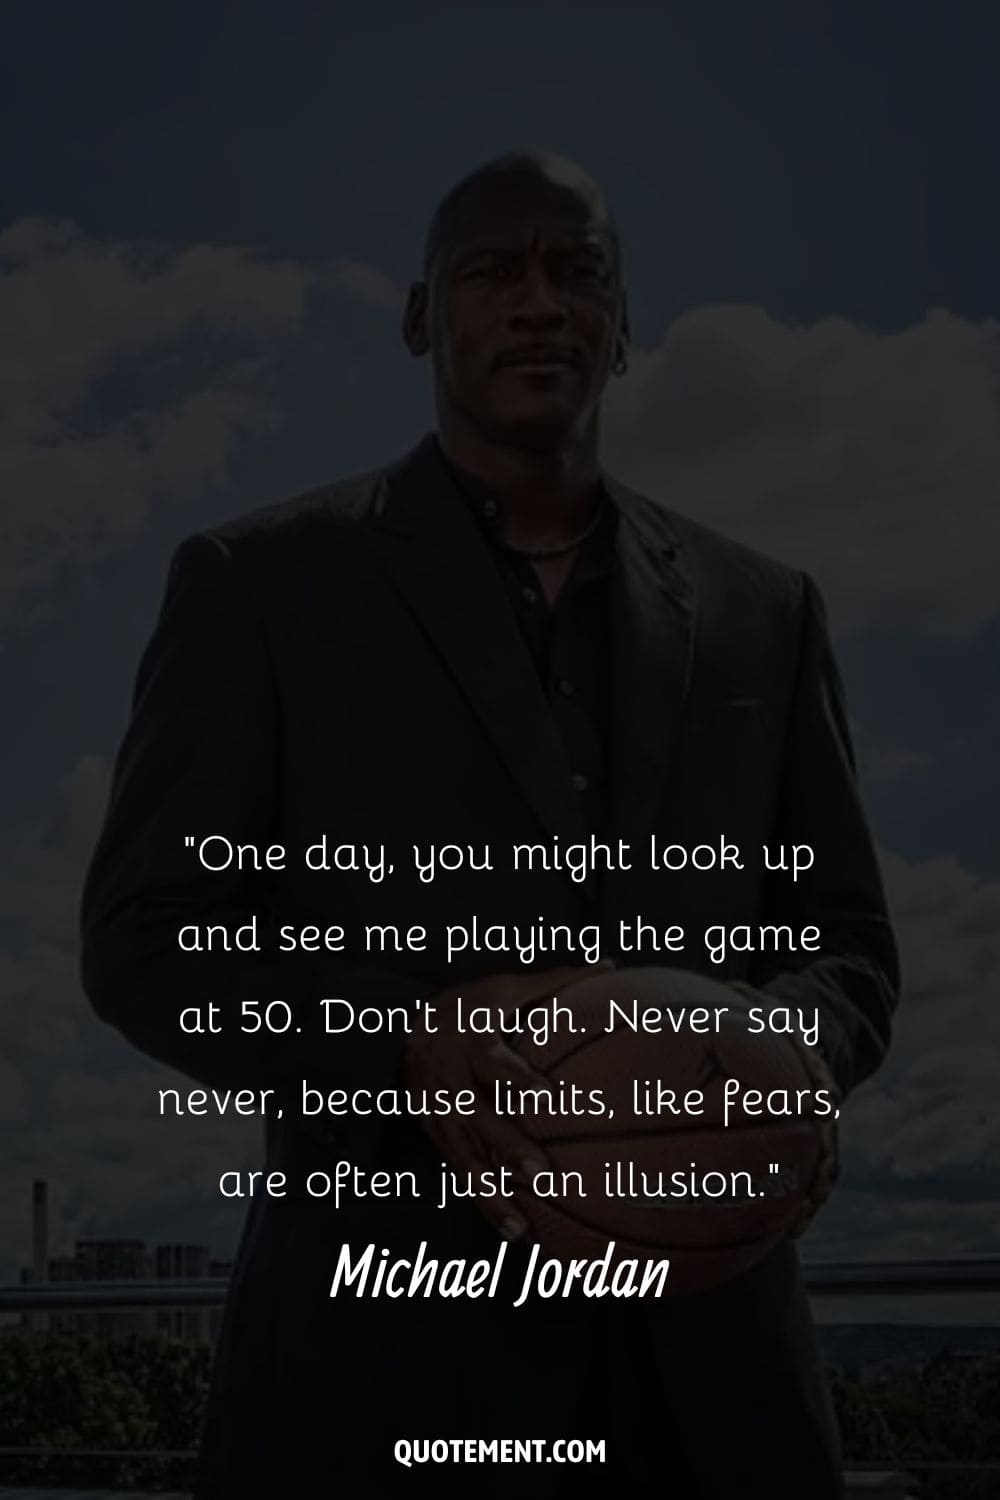 Michael Jordan with an urban backdrop and blue sky representing the best Michael Jordan quote